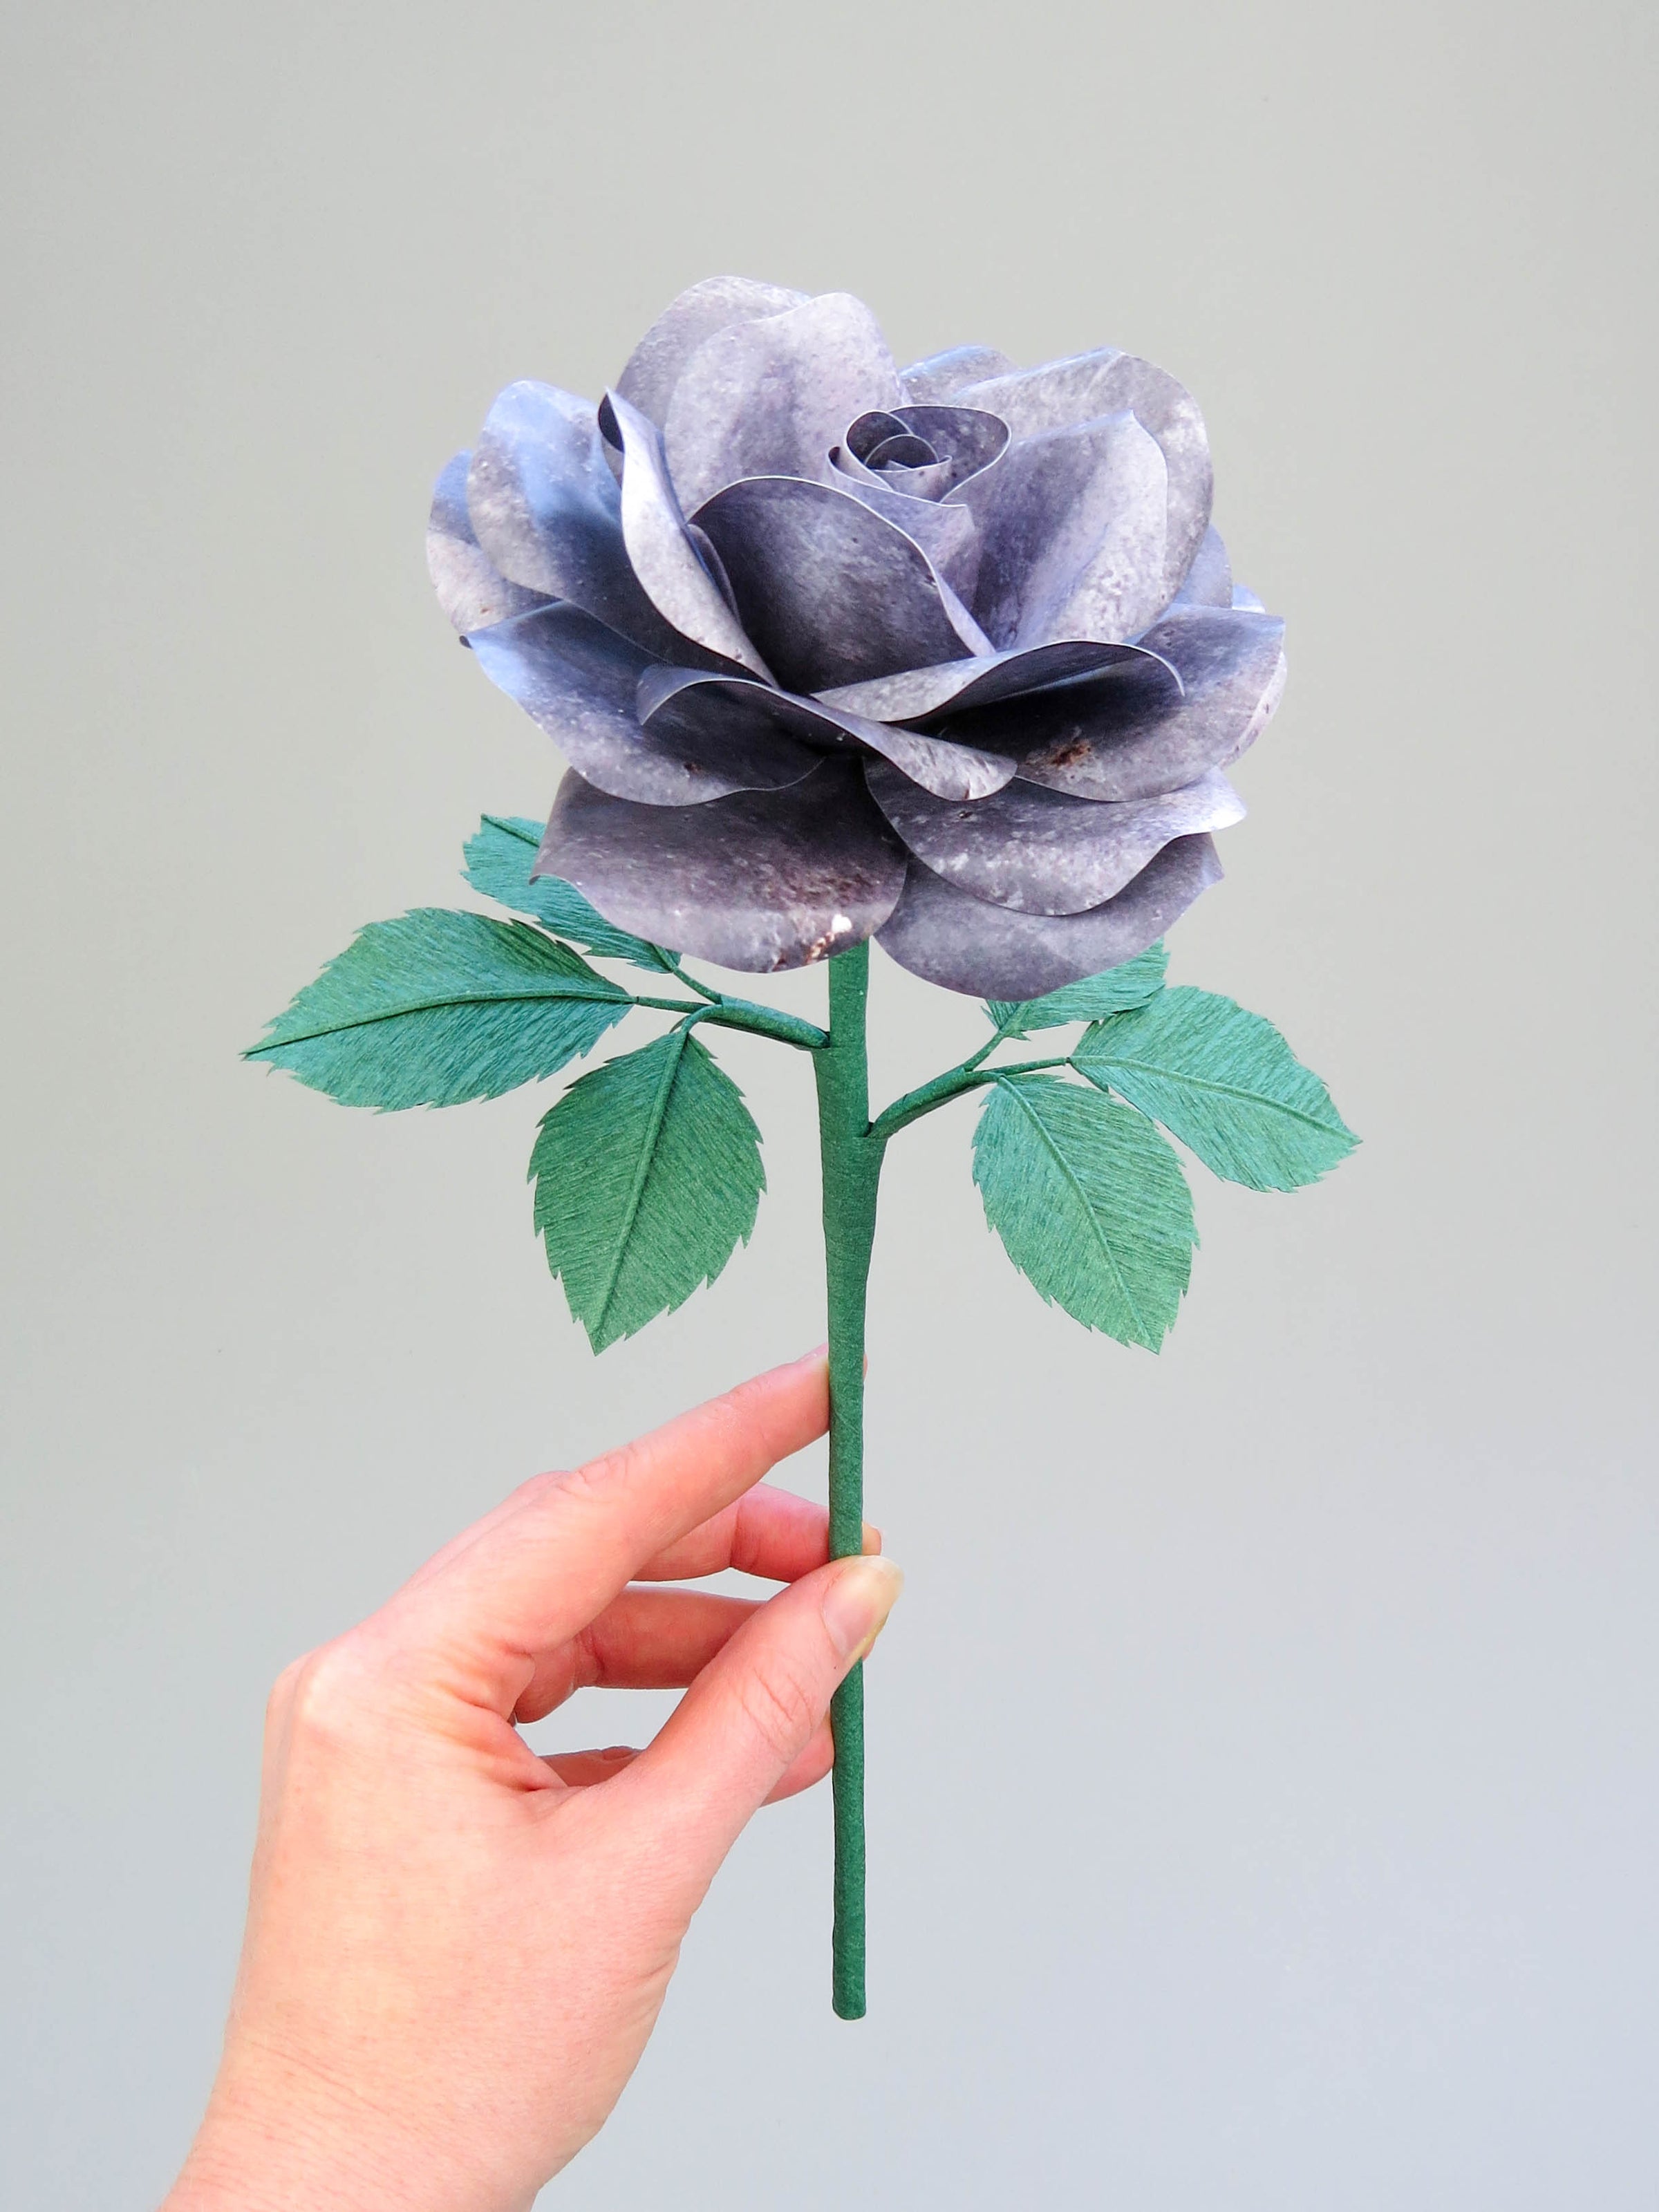 Pale white hand delicately holding the stem of a grey iron paper rose with six forest green leaves